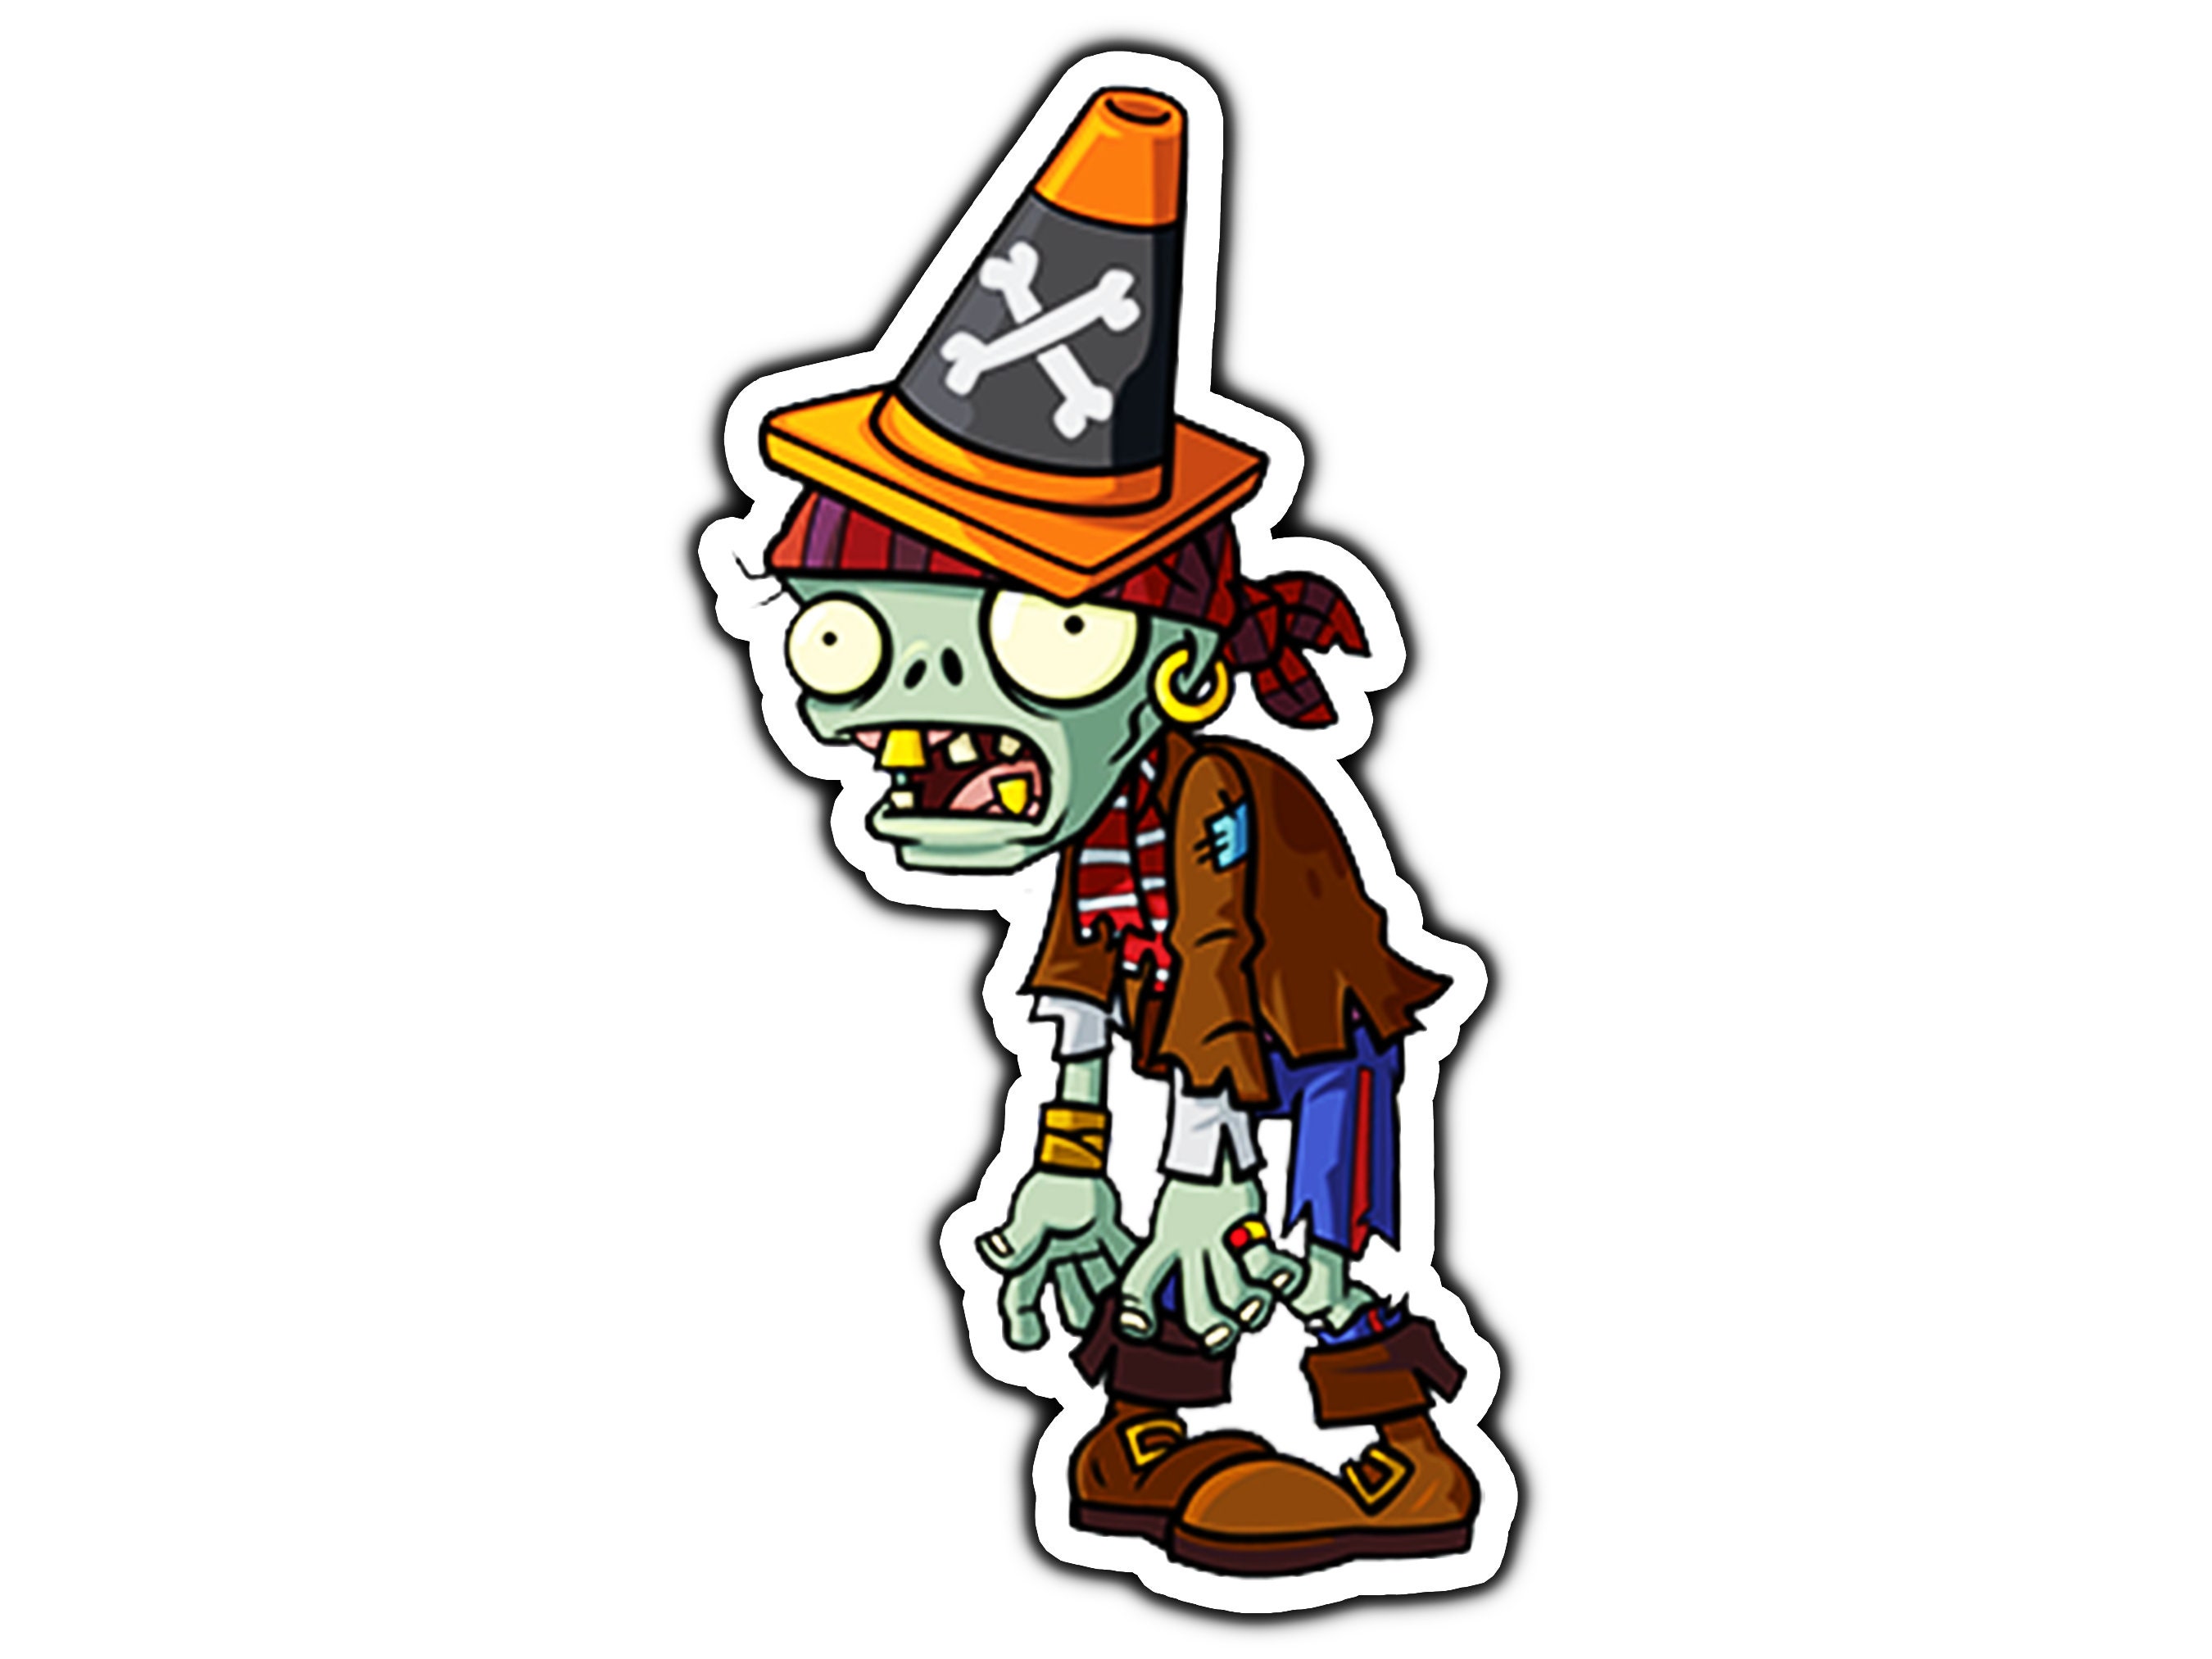  Plants vs. Zombies 2 Wall Decals: Special Pirate Seas